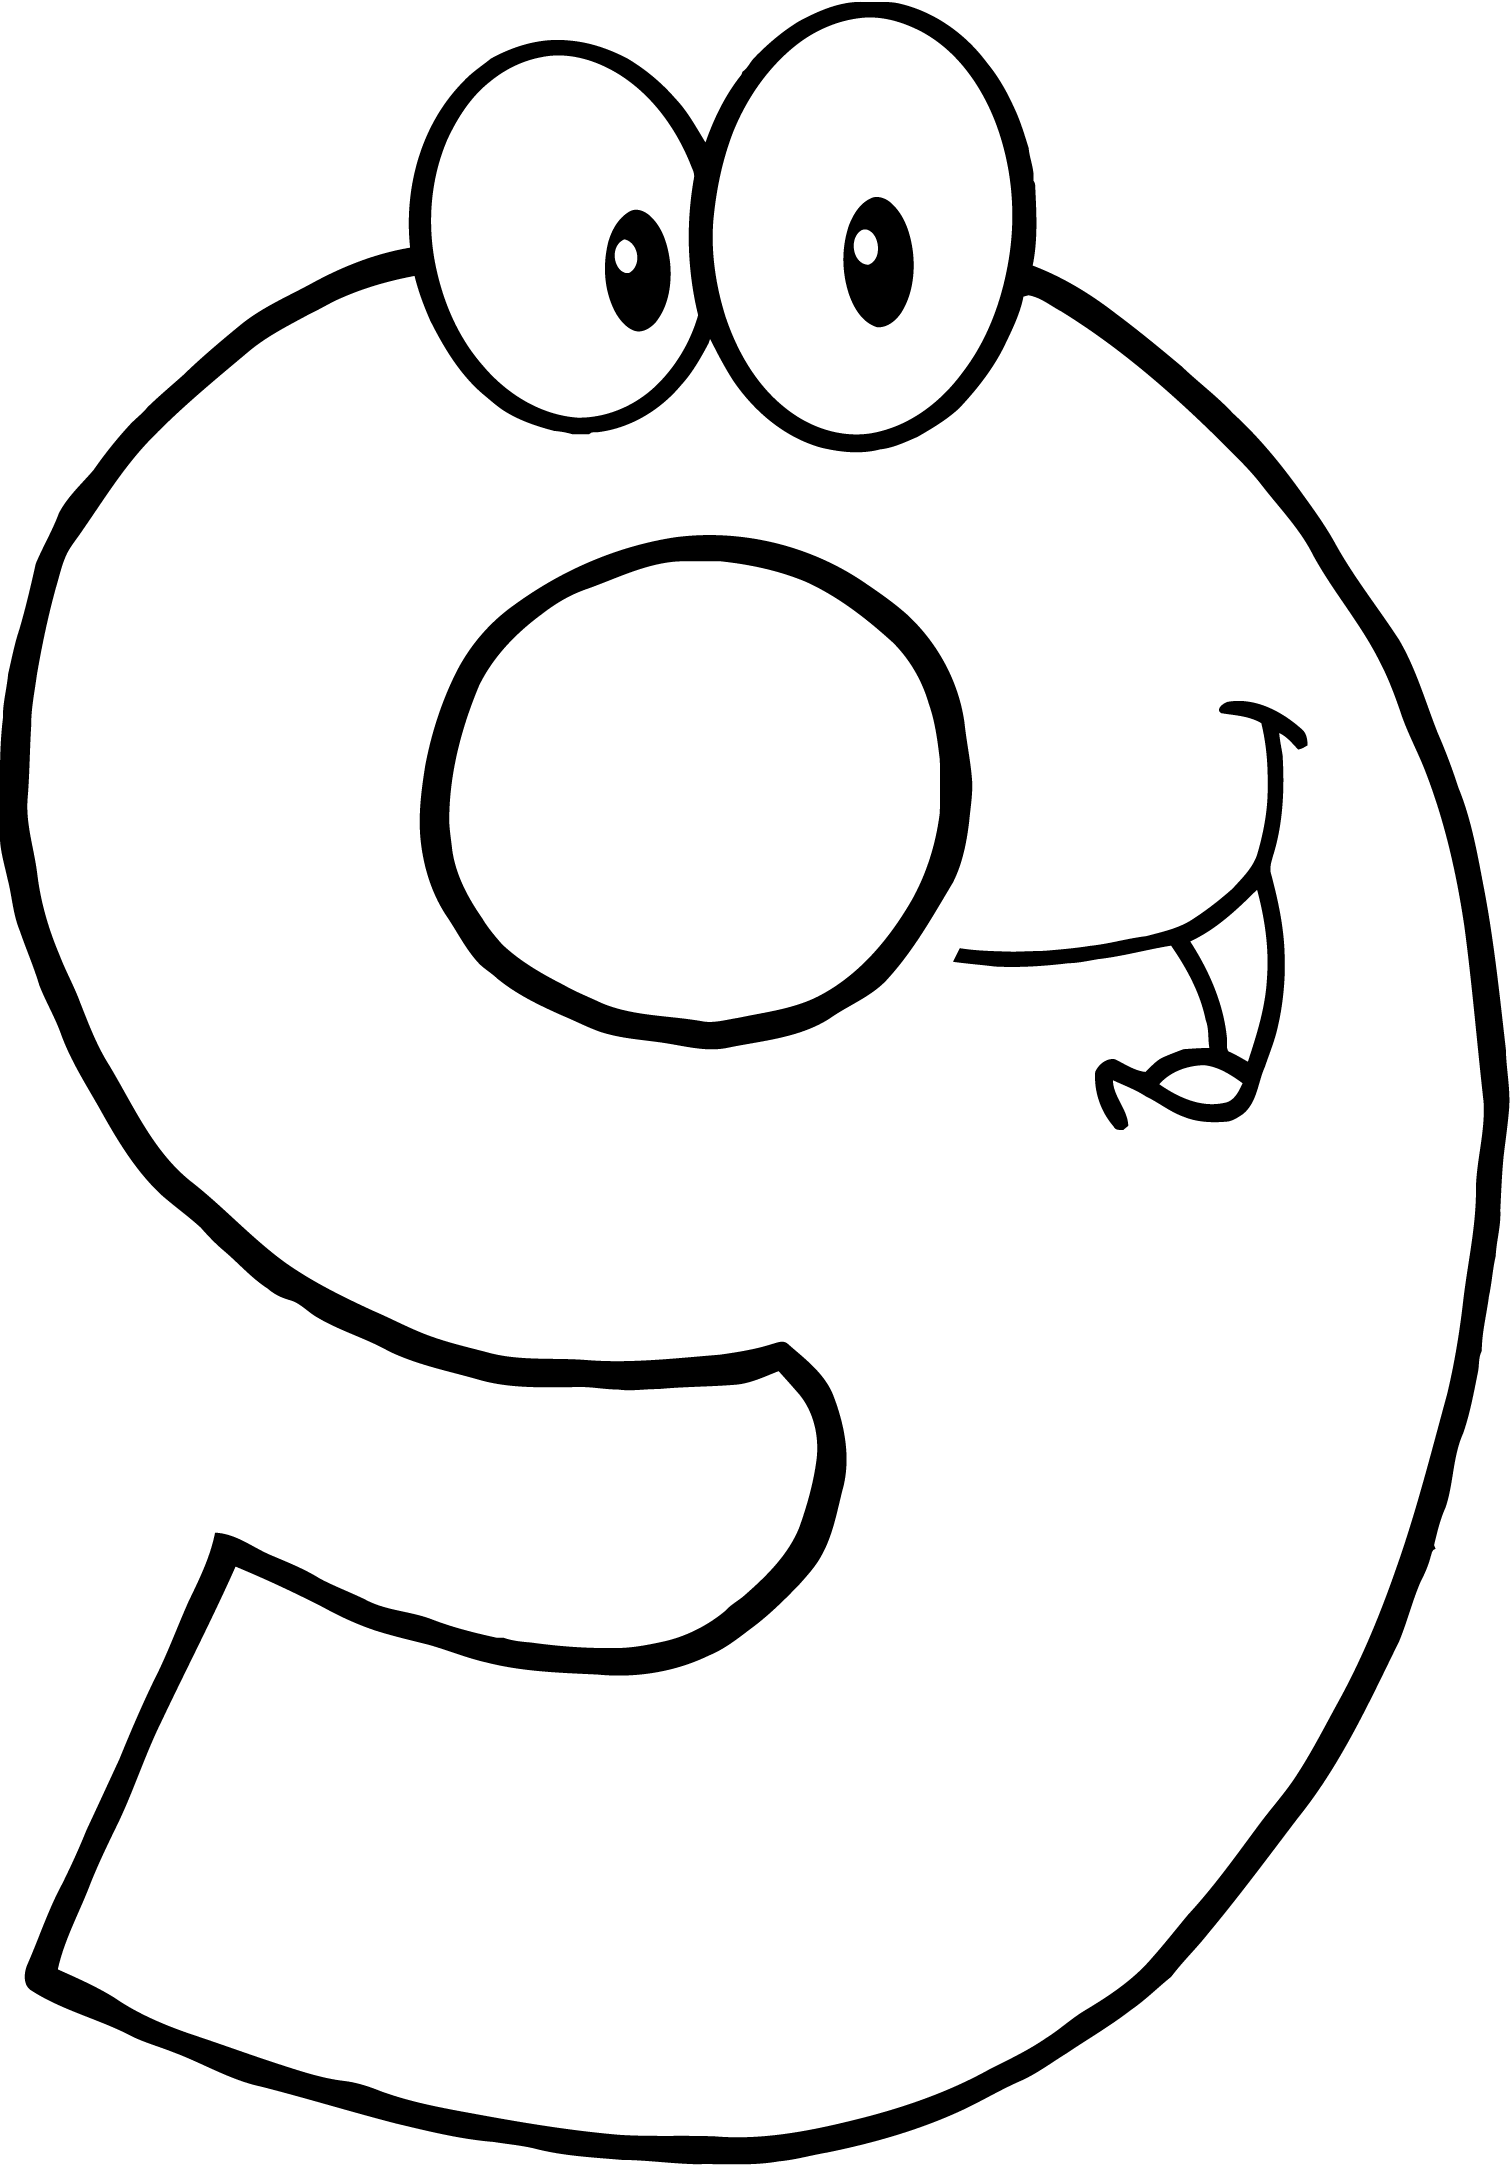 Number 9 clipart black and white